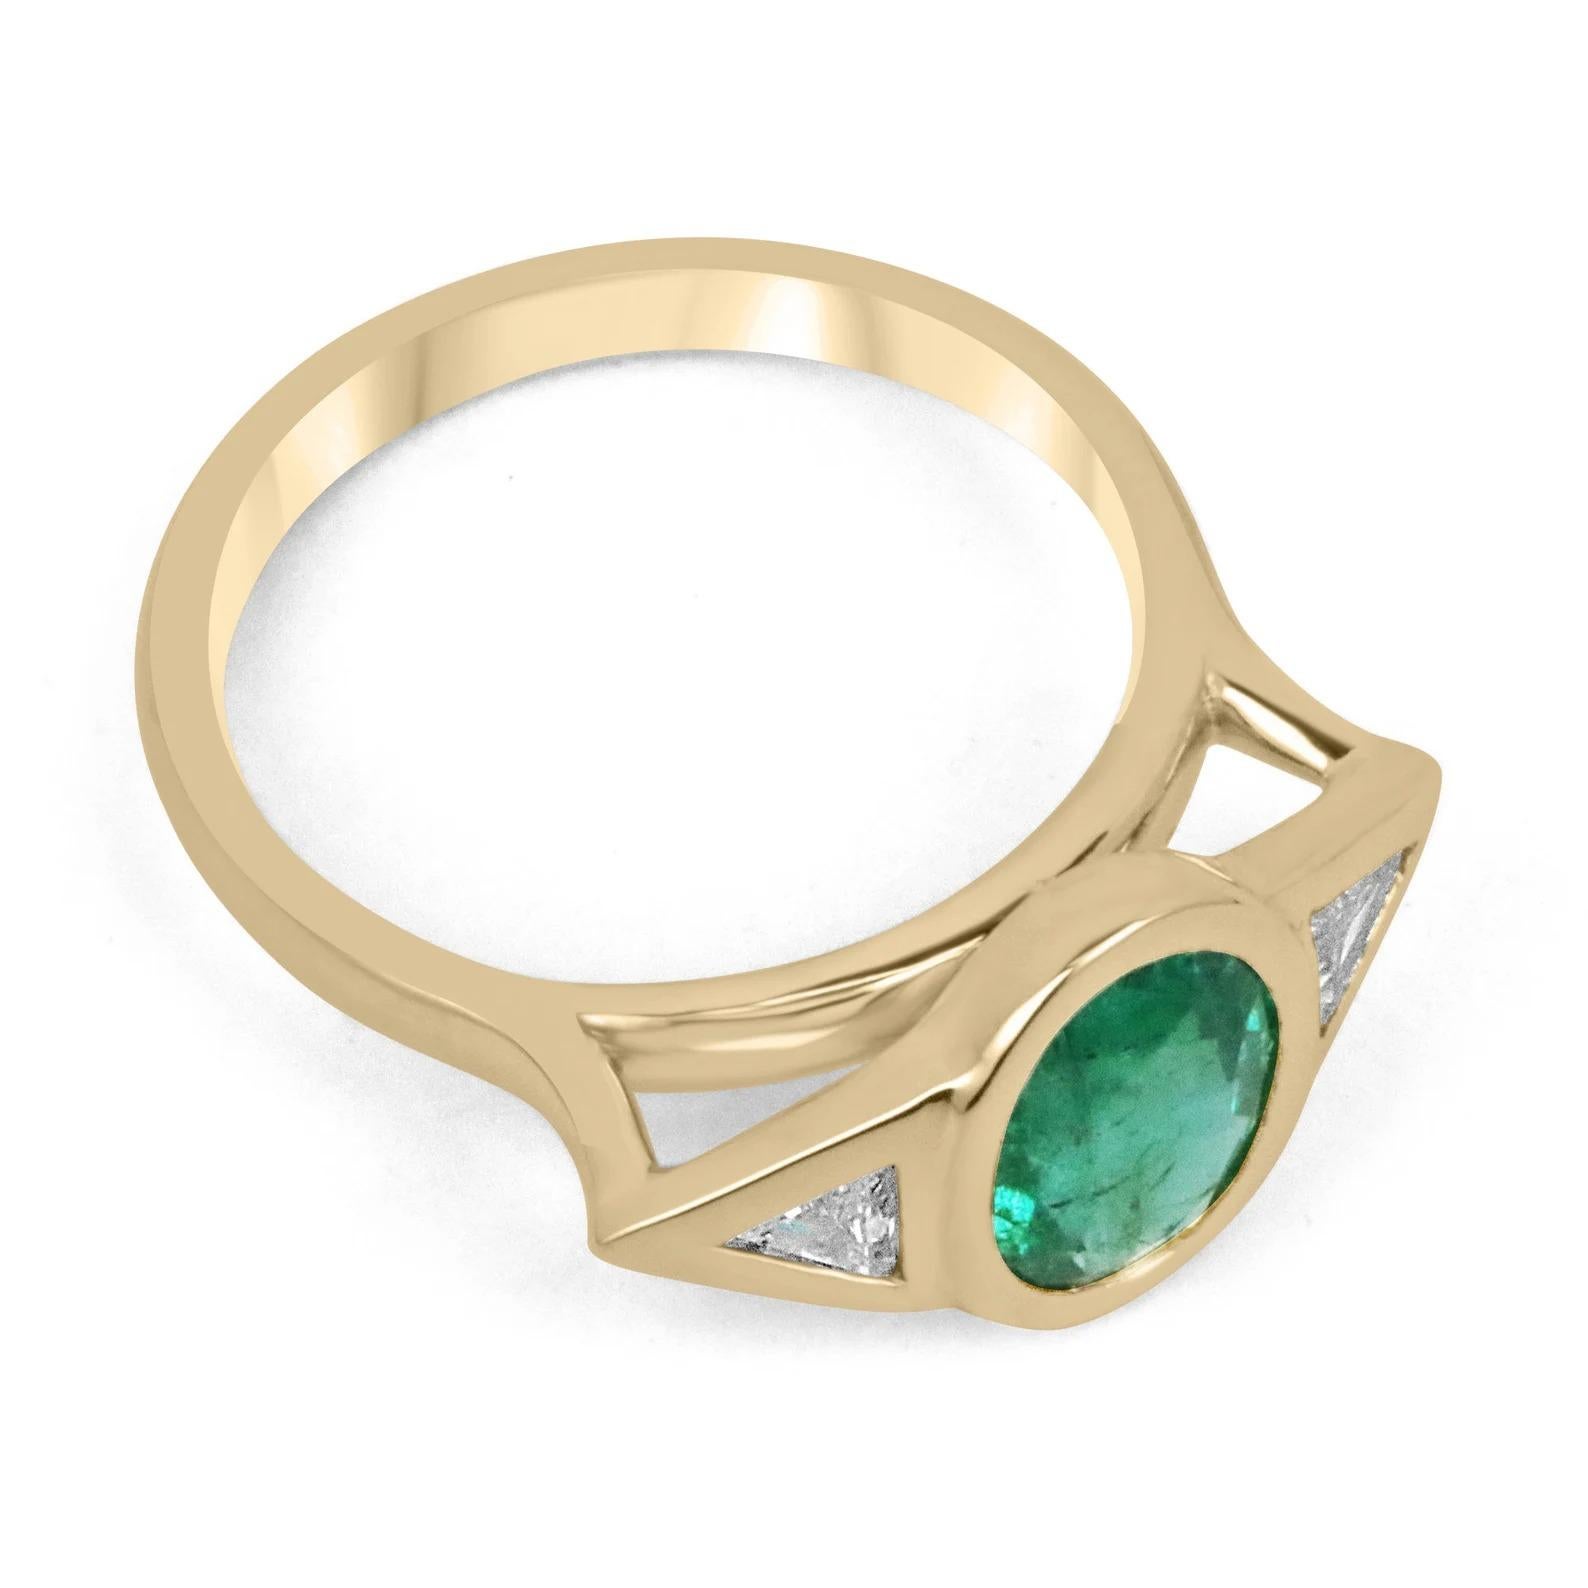 Featured here is a gorgeous AAA dark vivid emerald and diamond three-stone ring. The center stone is a stunning natural emerald-Oval cut. This gemstone displays medium green color and very good eye clarity. We designed this ring to be medium profile